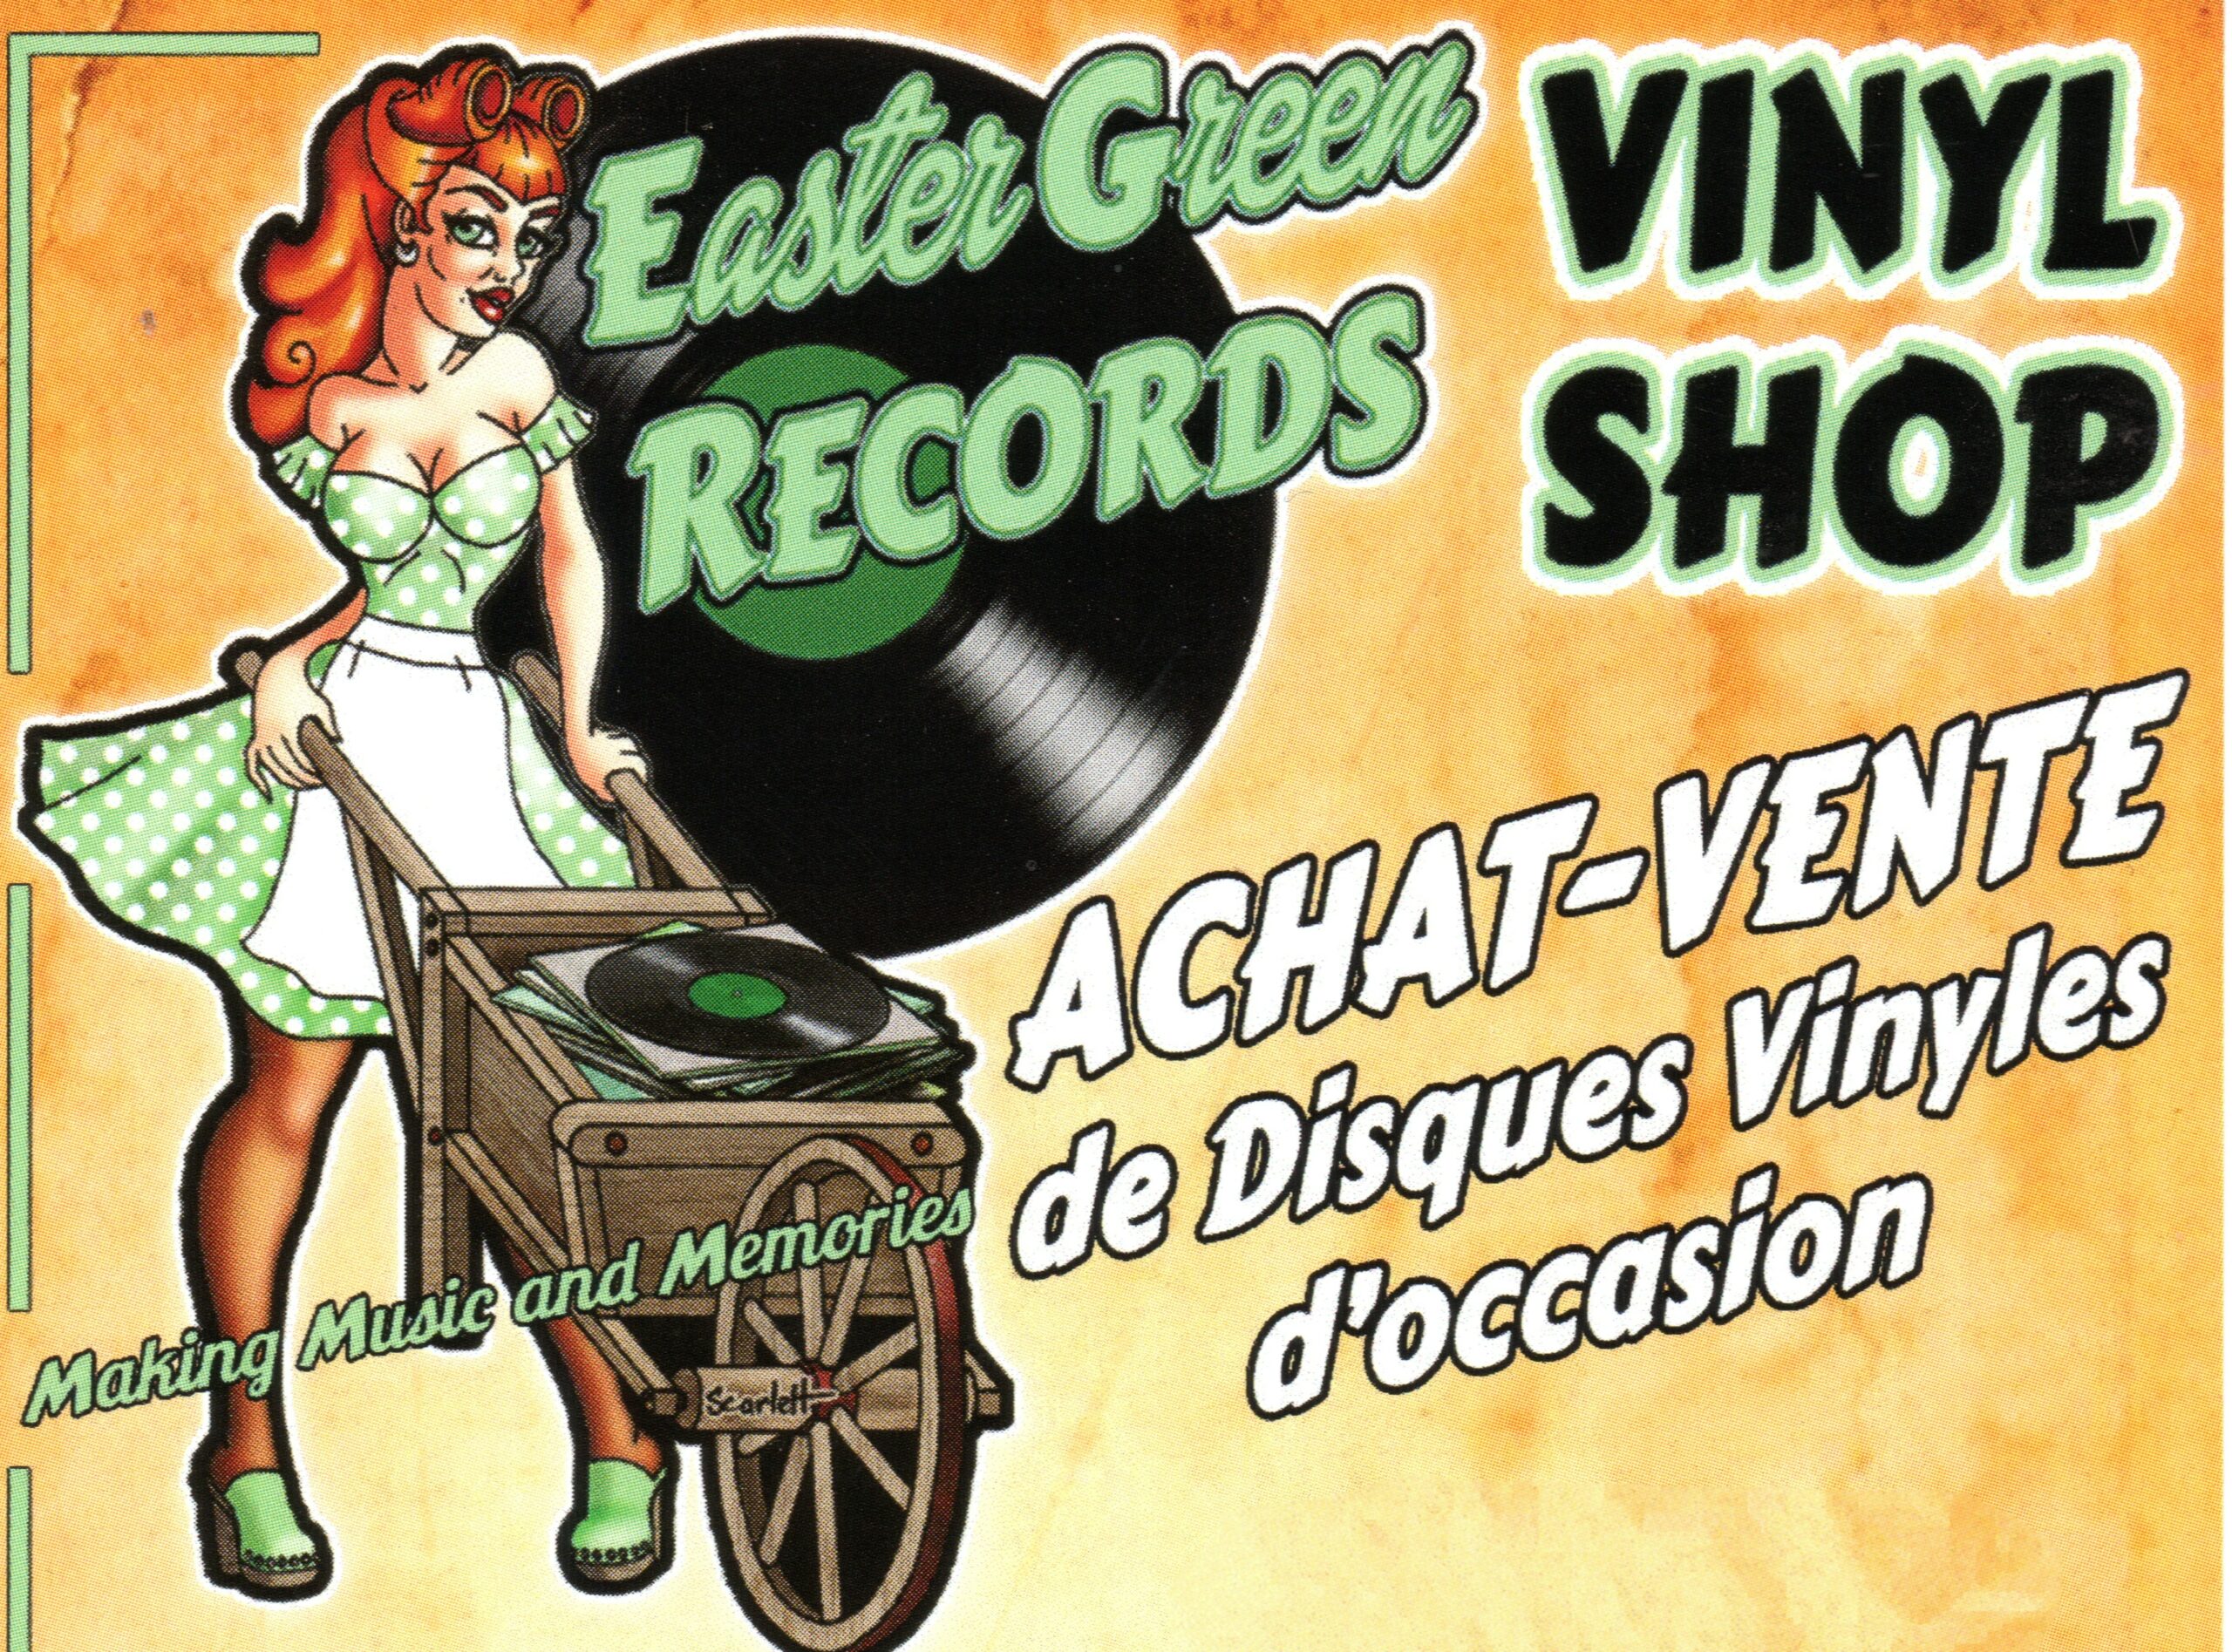 Easter Green Records